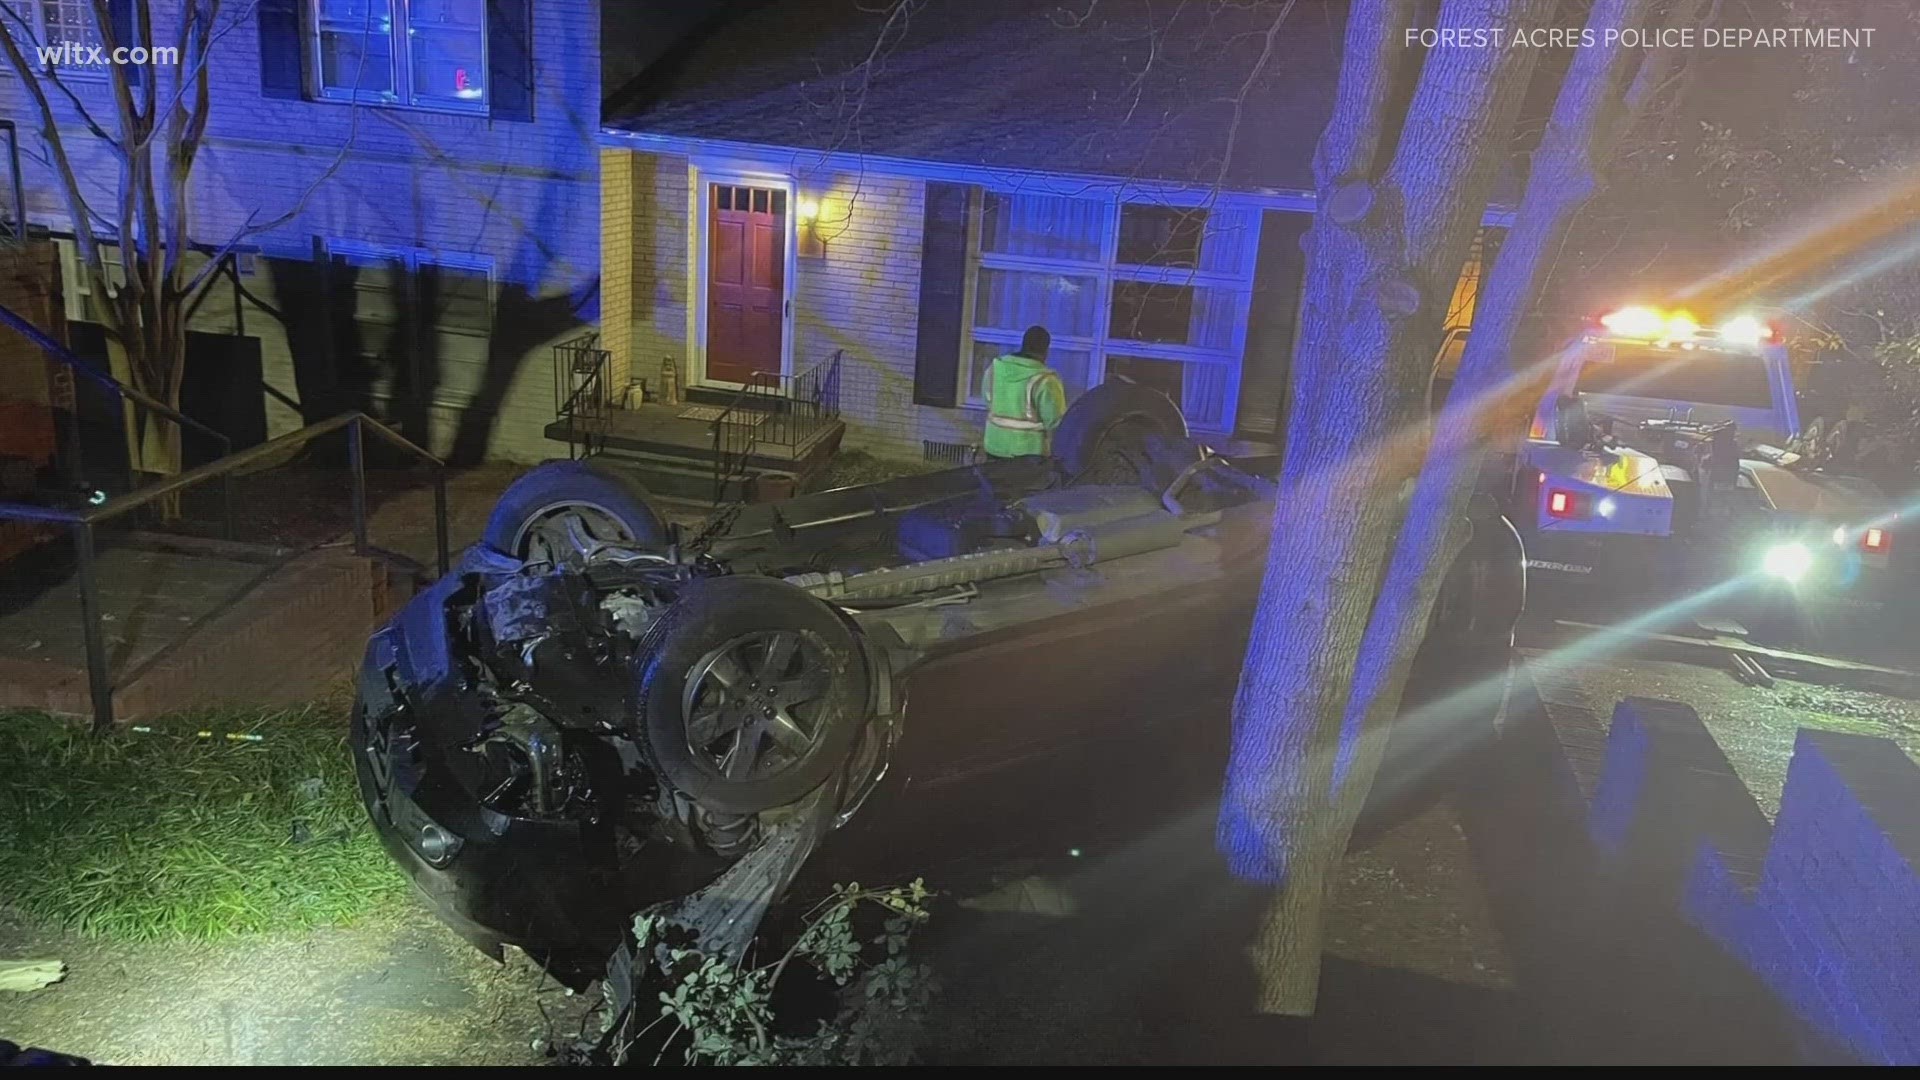 A woman is in custody after a police chase leaving her car crashed, upside down in front of a home.